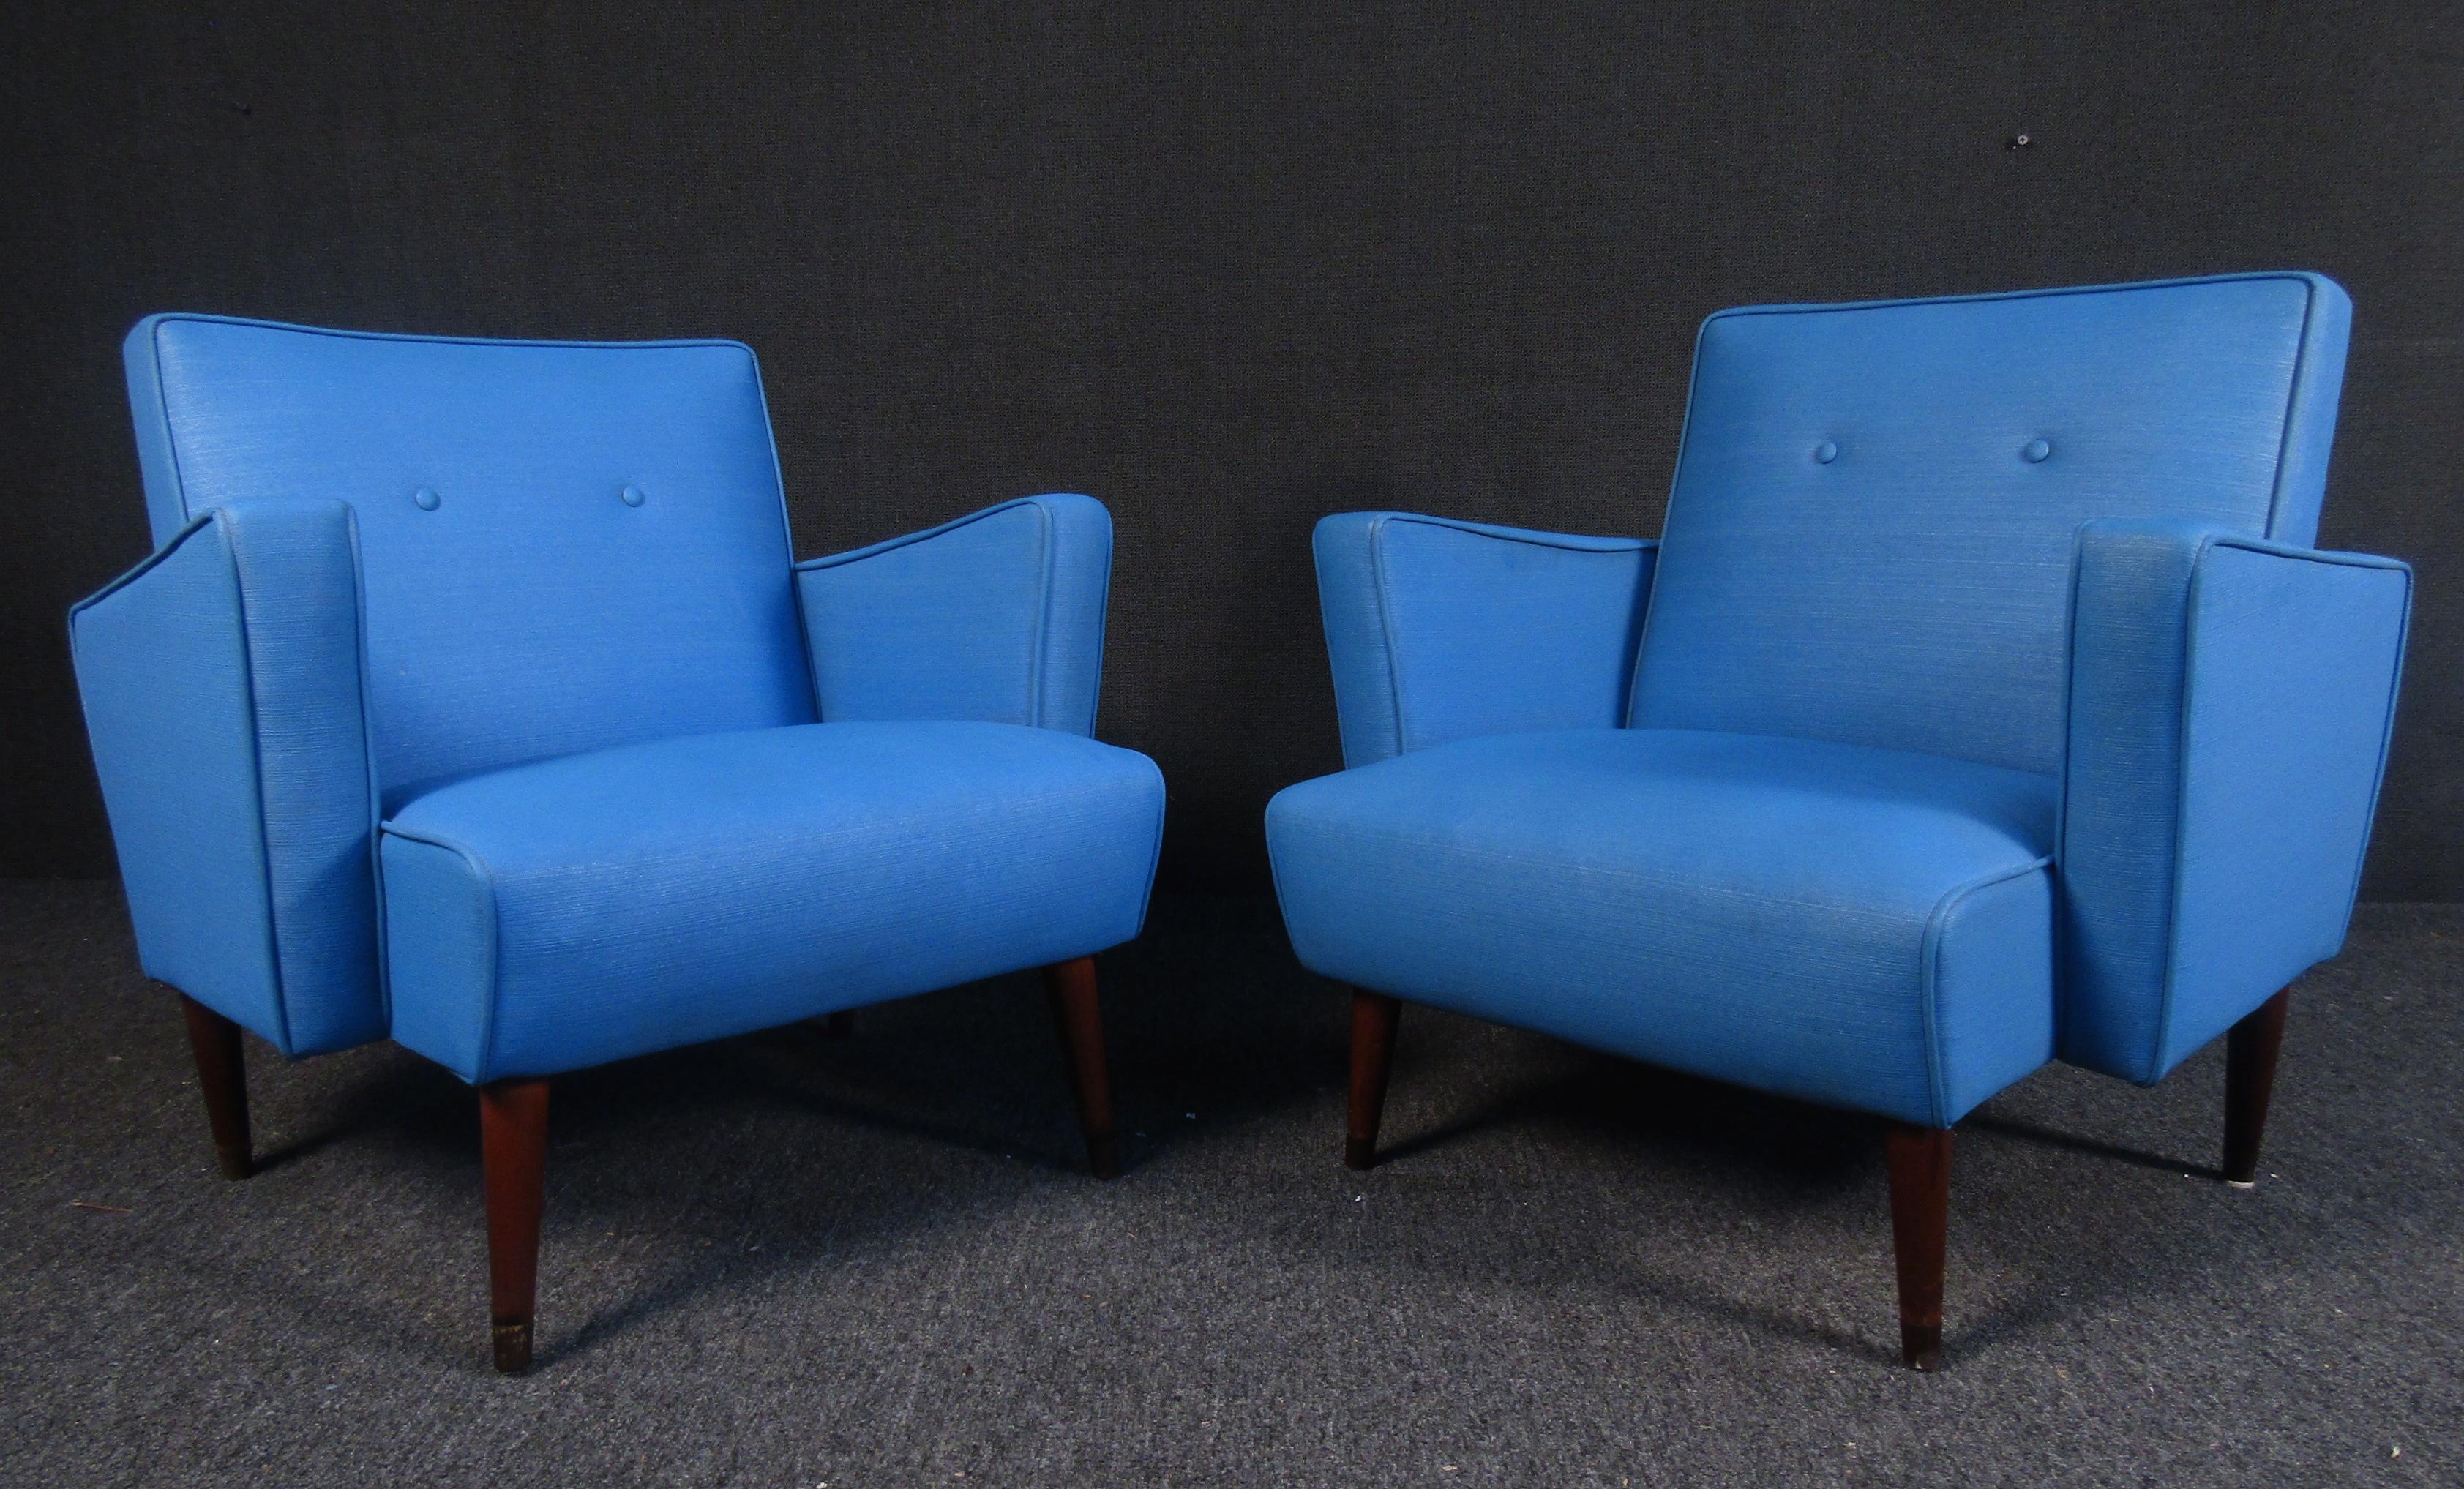 Pair of Mid-Century Modern Lounge Chairs In Good Condition For Sale In Brooklyn, NY